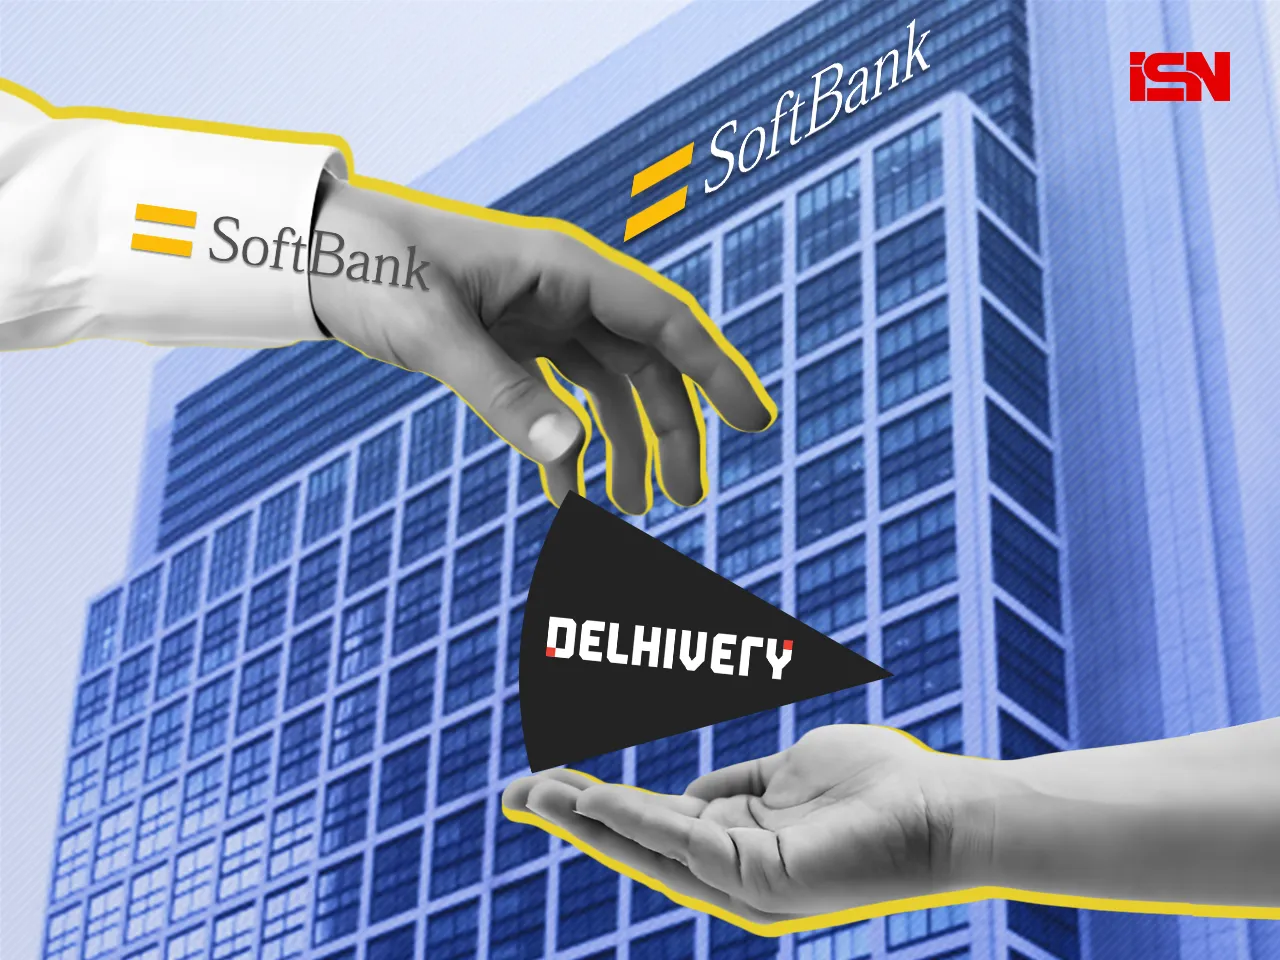 Investment giant Softbank likely sold Rs 747Cr worth of shares in Delhivery